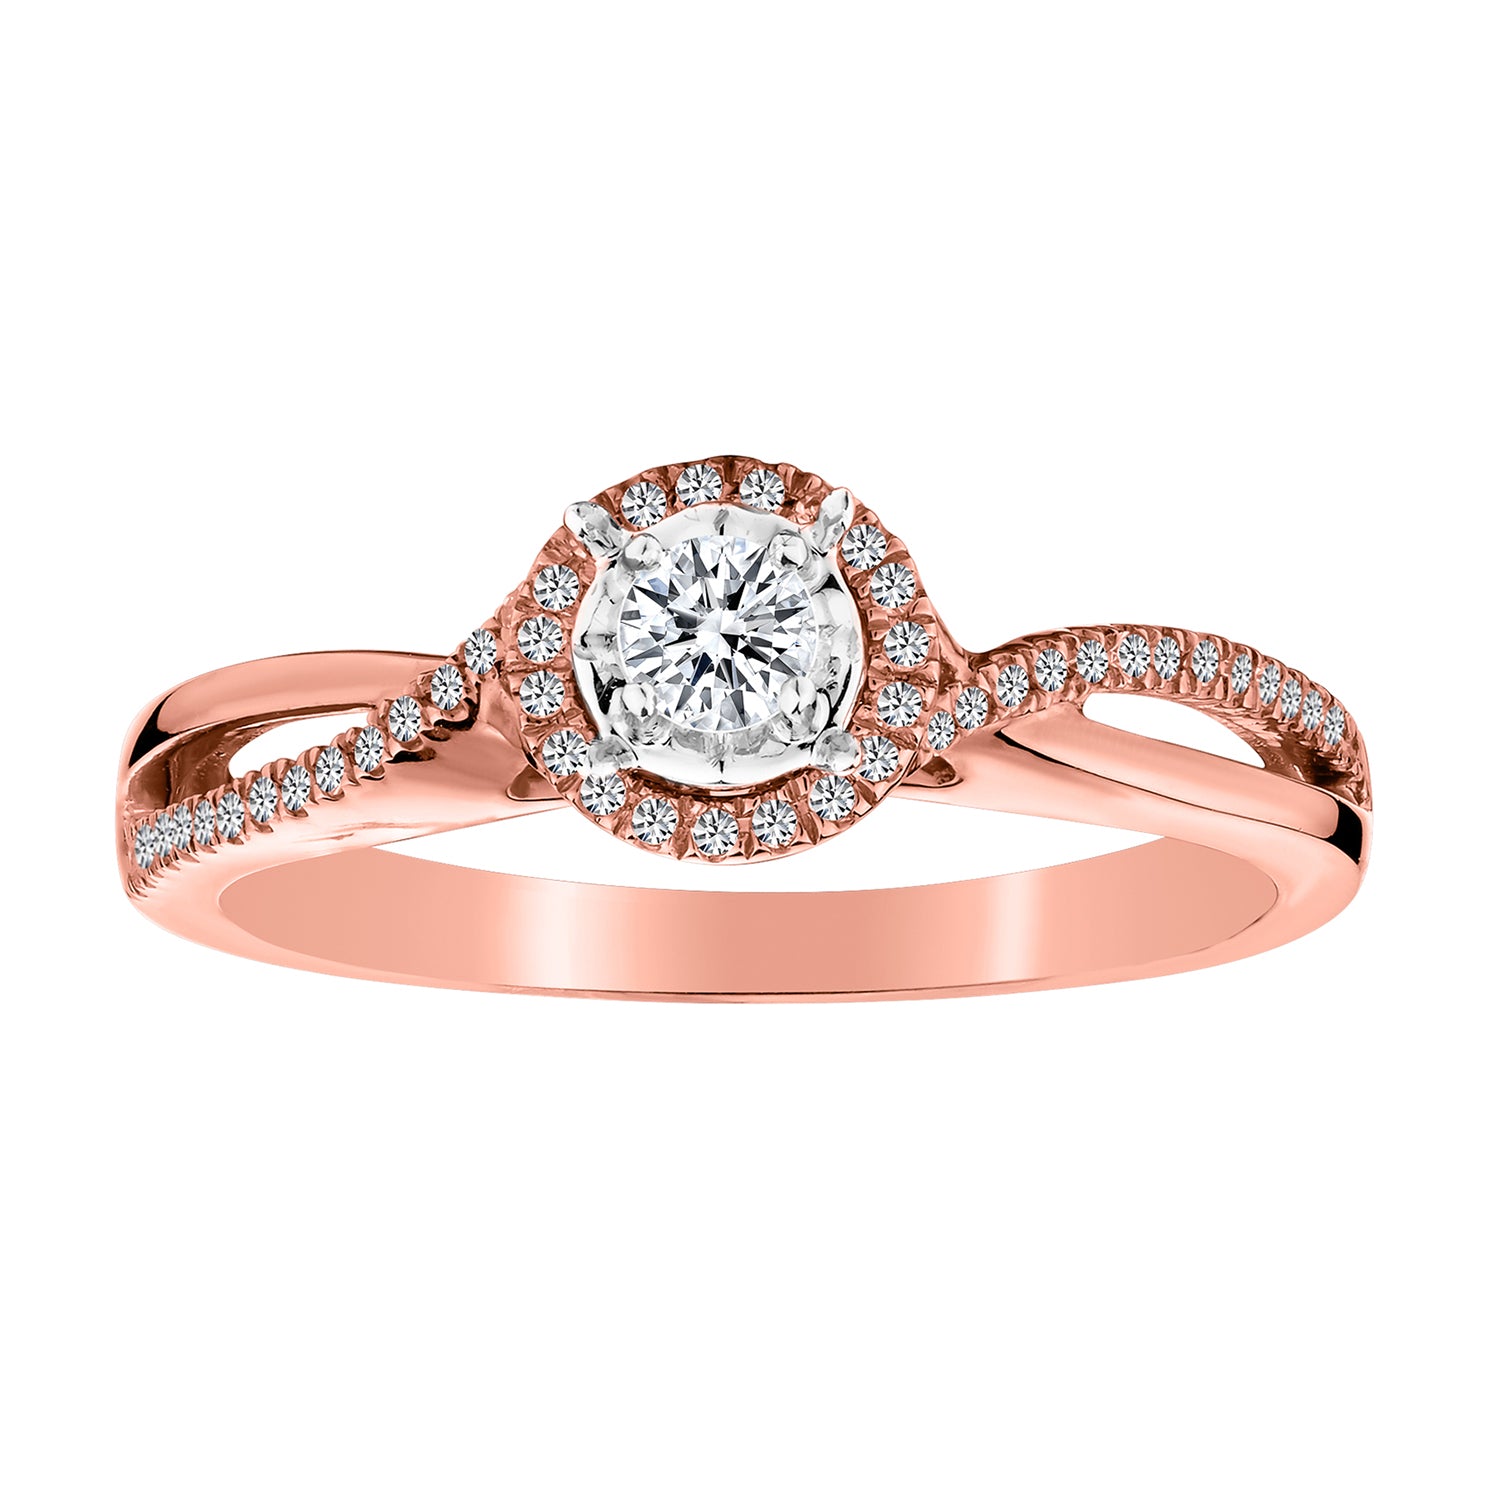 .20 Carat Canadian Diamond "Dream" Engagement Ring,  10kt Rose Gold. Griffin Jewellery Designs